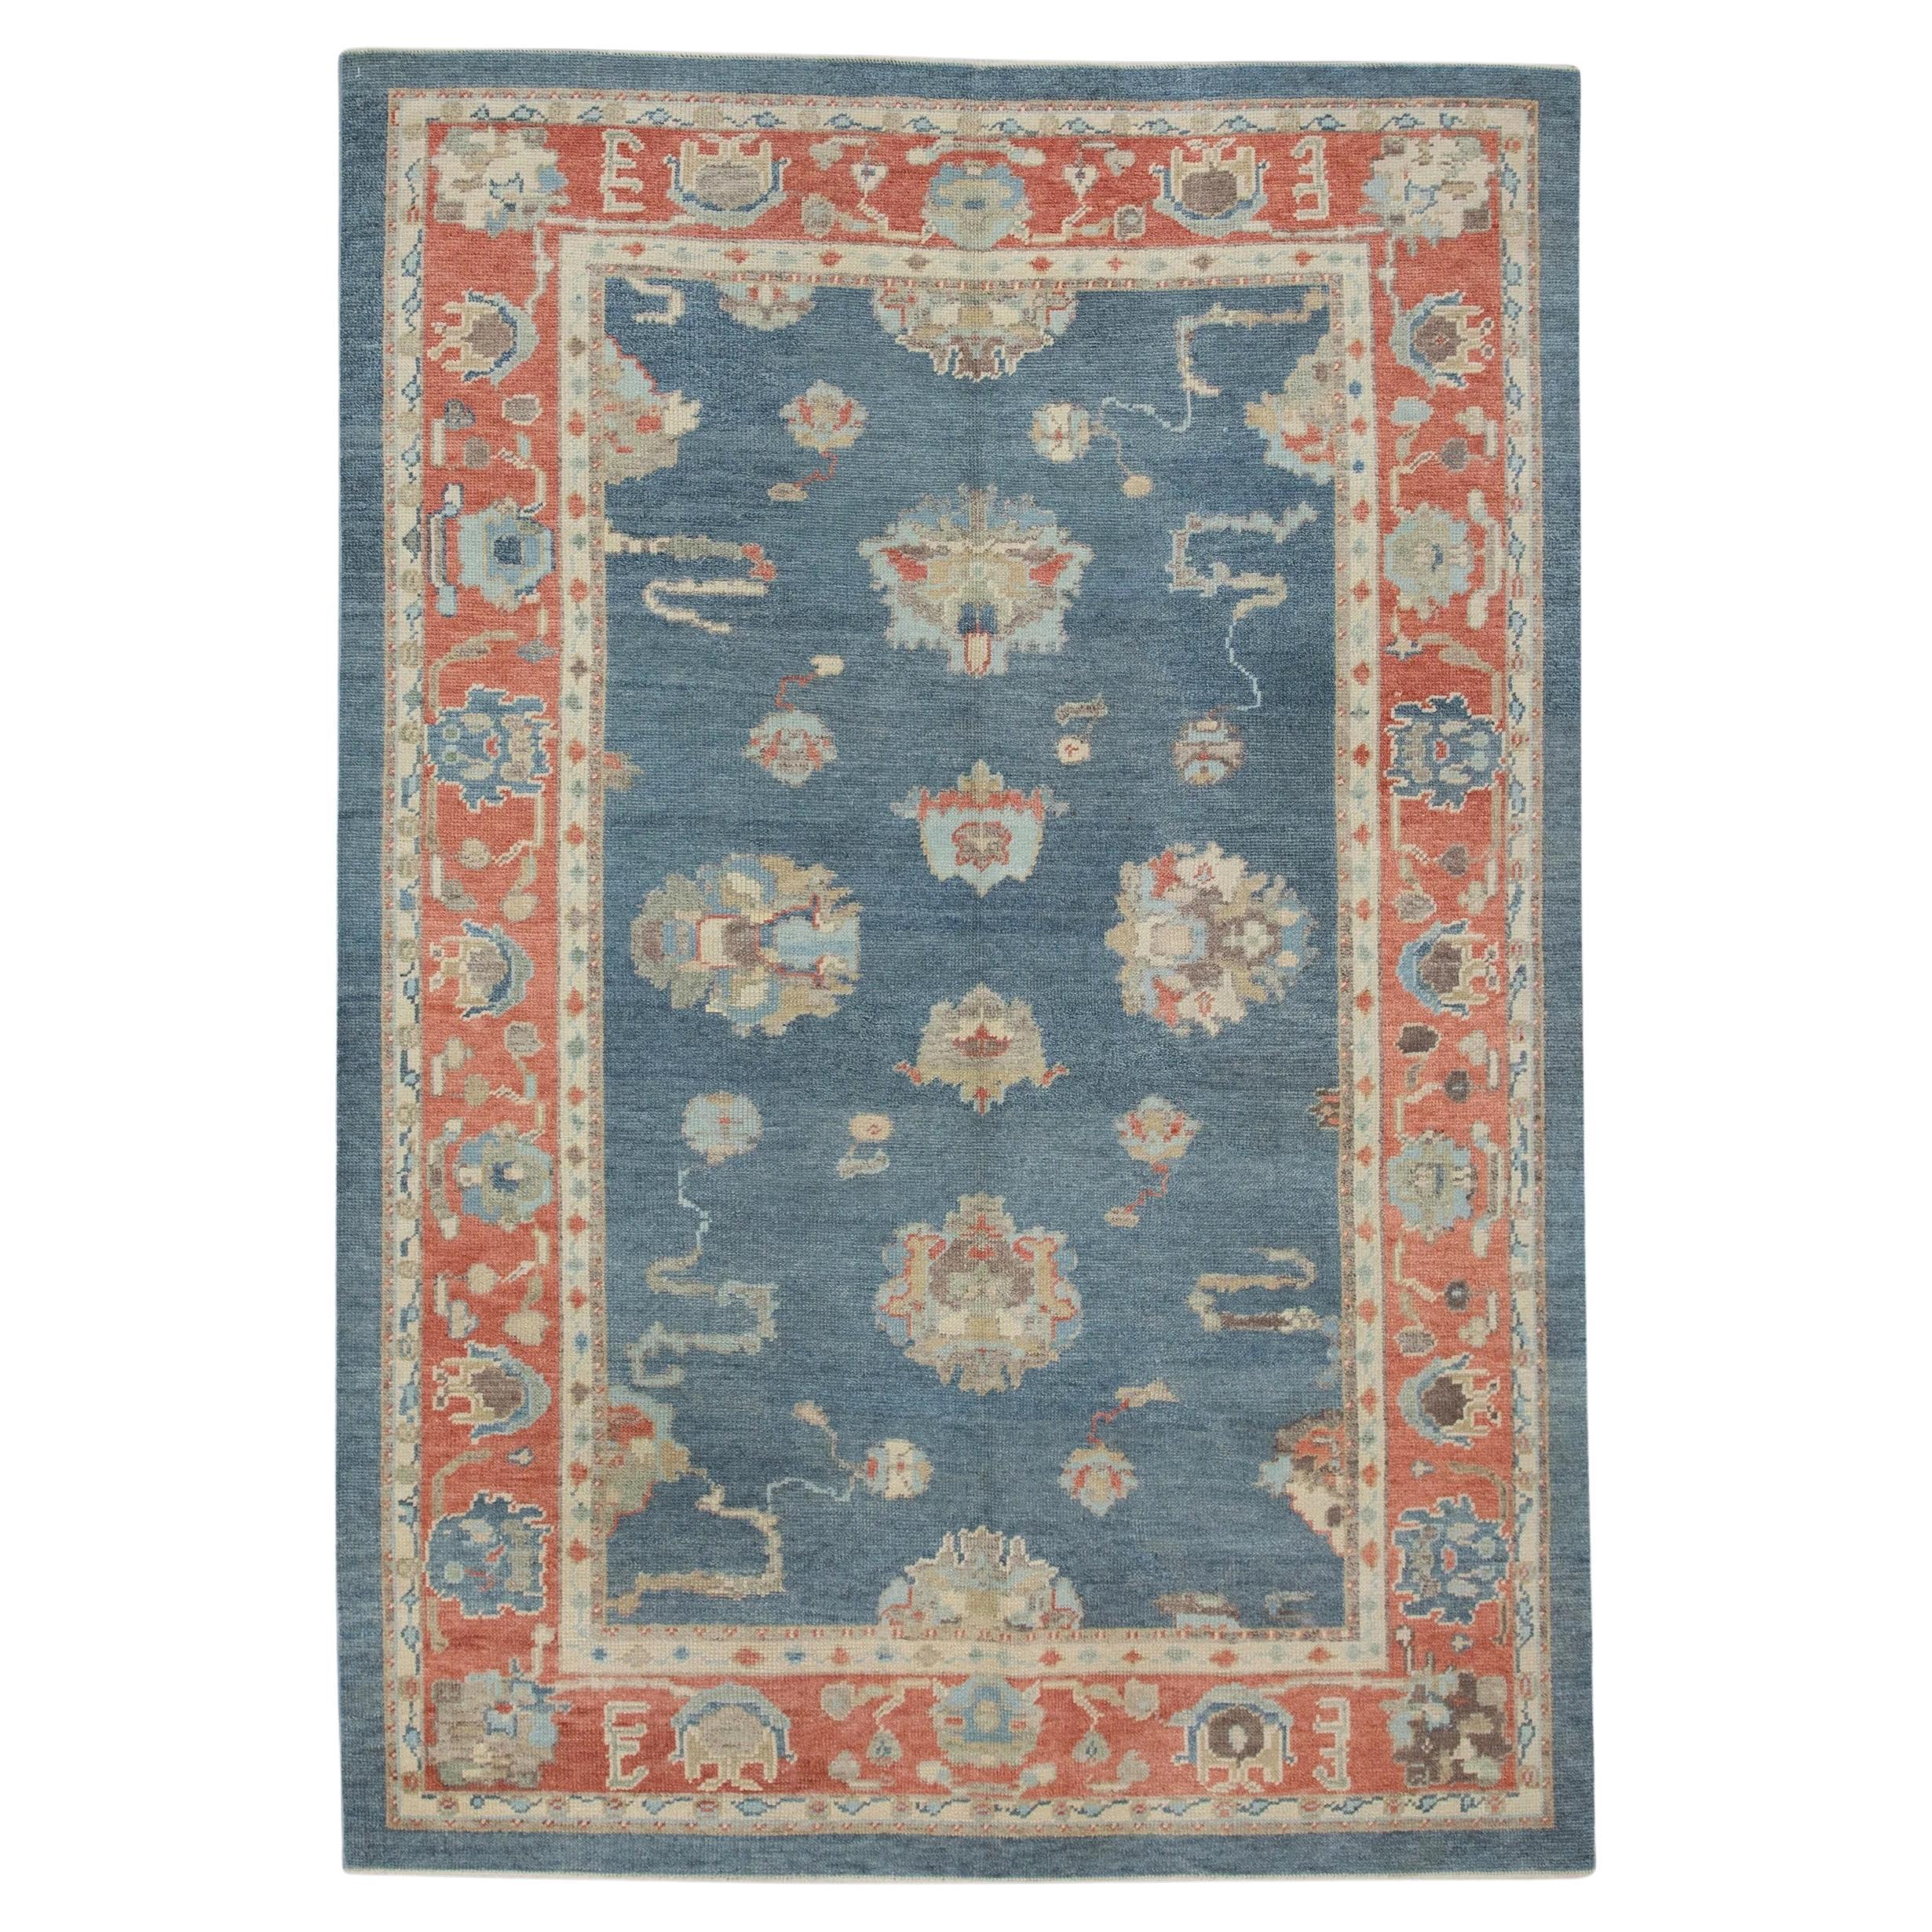 Red and Blue Floral Handwoven Wool Turkish Oushak Rug 6' x 8'6" For Sale